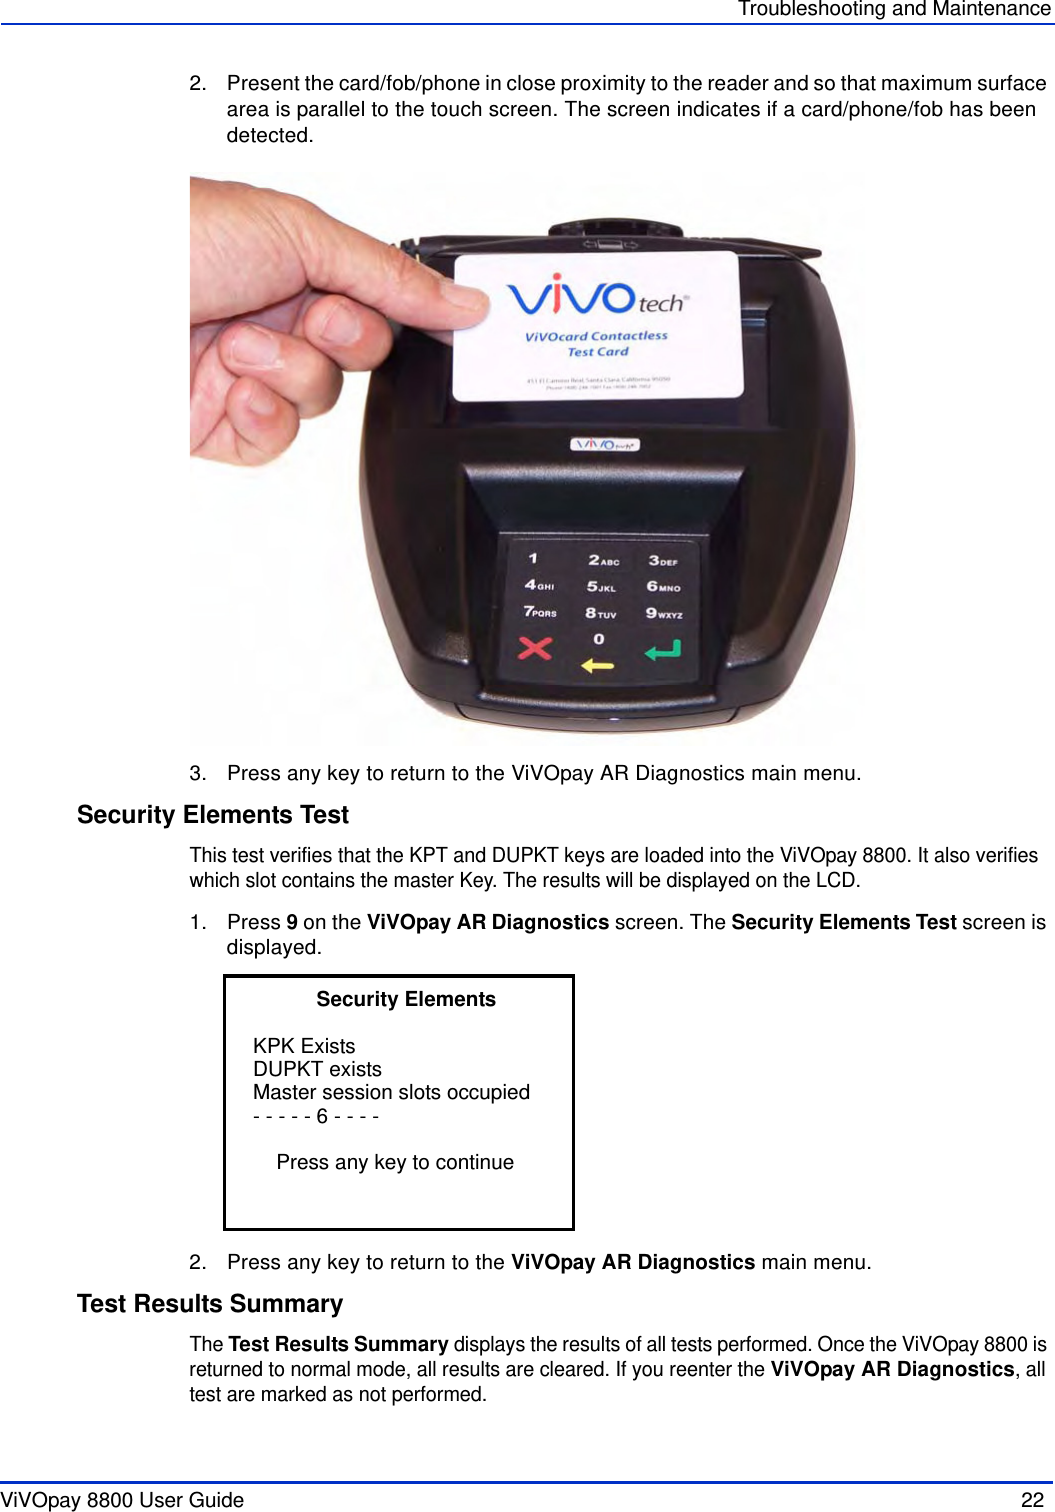 ViVOpay 8800 User Guide  22               Troubleshooting and Maintenance2. Present the card/fob/phone in close proximity to the reader and so that maximum surface area is parallel to the touch screen. The screen indicates if a card/phone/fob has been detected.3. Press any key to return to the ViVOpay AR Diagnostics main menu.Security Elements TestThis test verifies that the KPT and DUPKT keys are loaded into the ViVOpay 8800. It also verifies which slot contains the master Key. The results will be displayed on the LCD. 1. Press 9 on the ViVOpay AR Diagnostics screen. The Security Elements Test screen is displayed.2. Press any key to return to the ViVOpay AR Diagnostics main menu.Test Results SummaryThe Test Results Summary displays the results of all tests performed. Once the ViVOpay 8800 is returned to normal mode, all results are cleared. If you reenter the ViVOpay AR Diagnostics, all test are marked as not performed.           Security Elements KPK Exists                                   DUPKT existsMaster session slots occupied- - - - - 6 - - - -    Press any key to continue